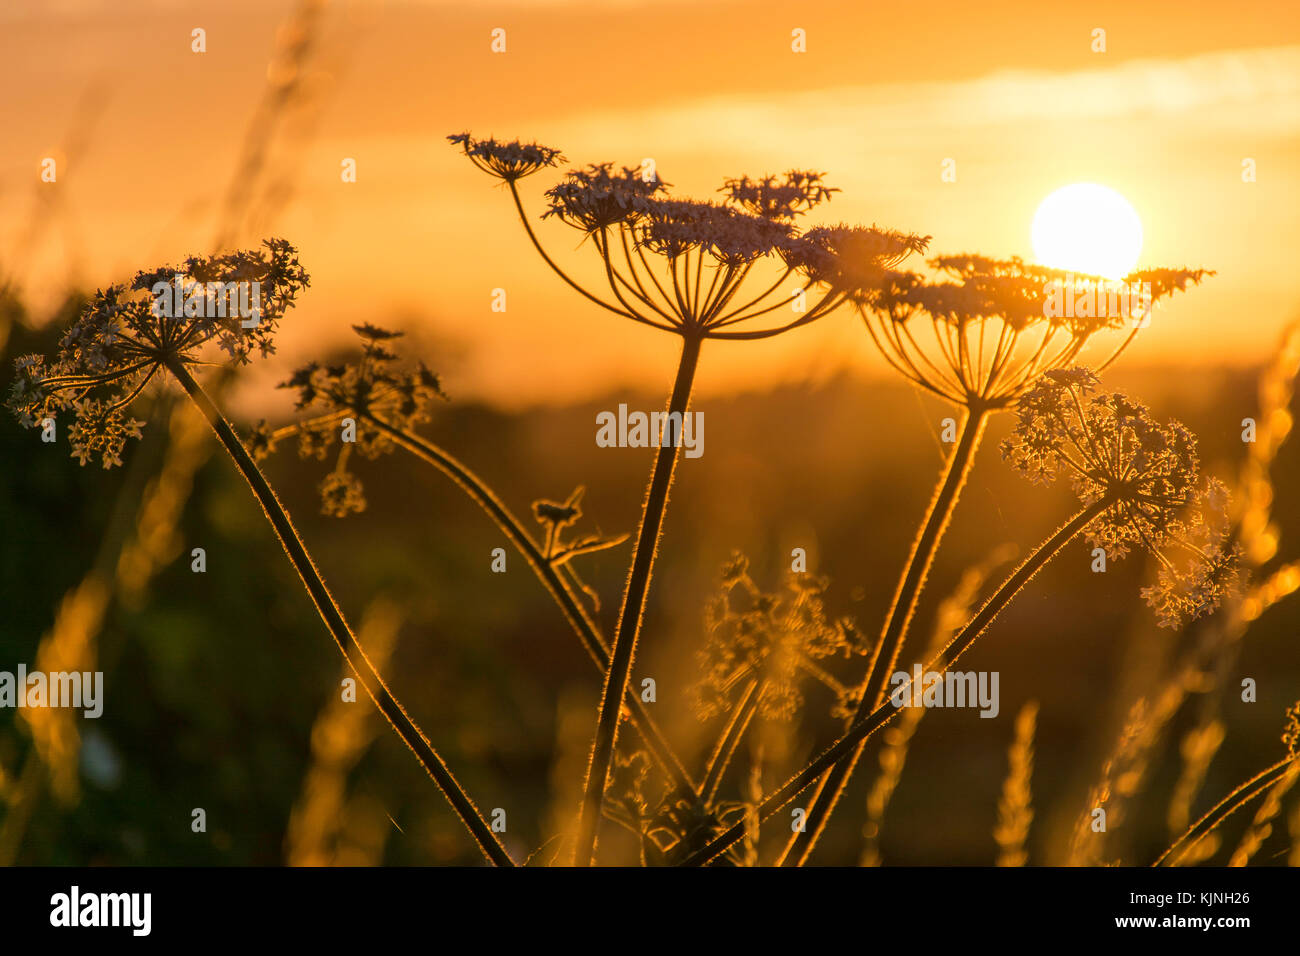 silhouette of cow parsley seed head at sunset Stock Photo